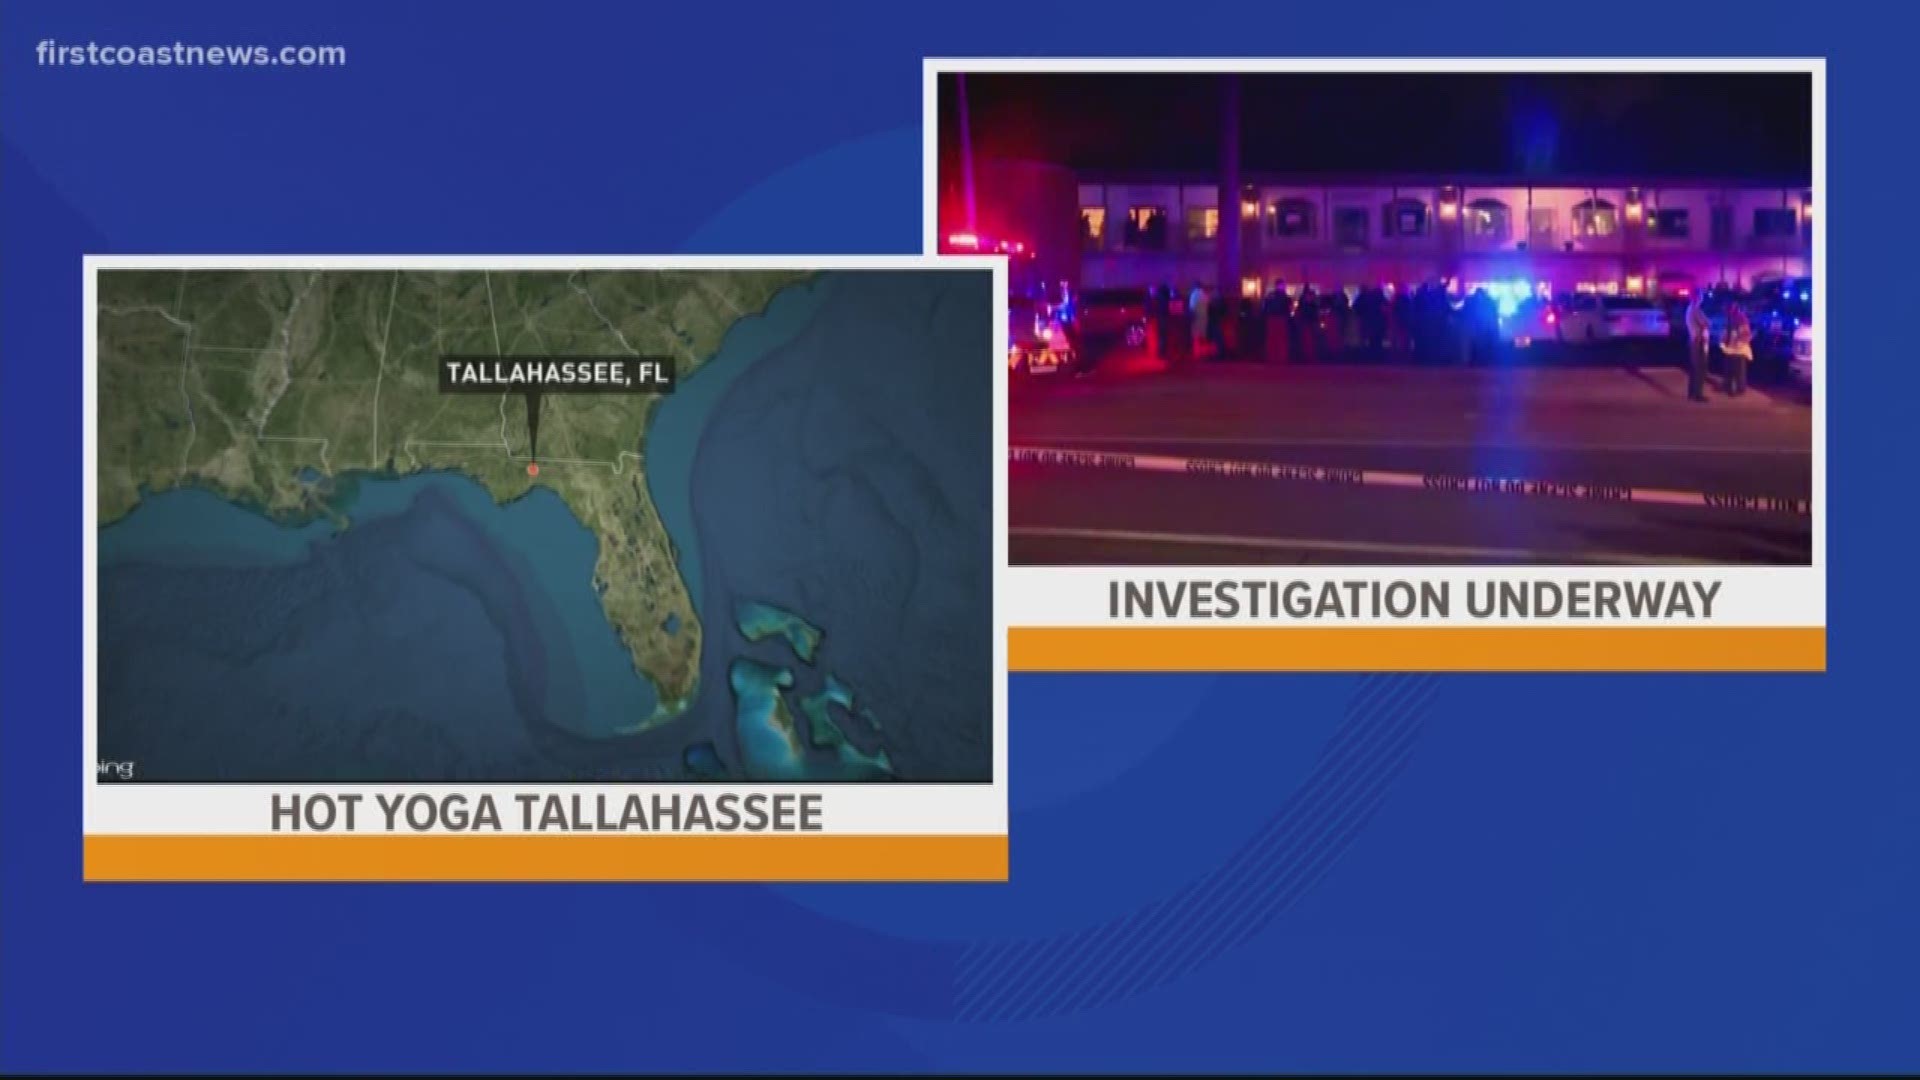 The two people killed at Hot Yoga Tallahassee have been identified as Dr. Nancy Van Vessem, 61, and Maura Binkley, 21.